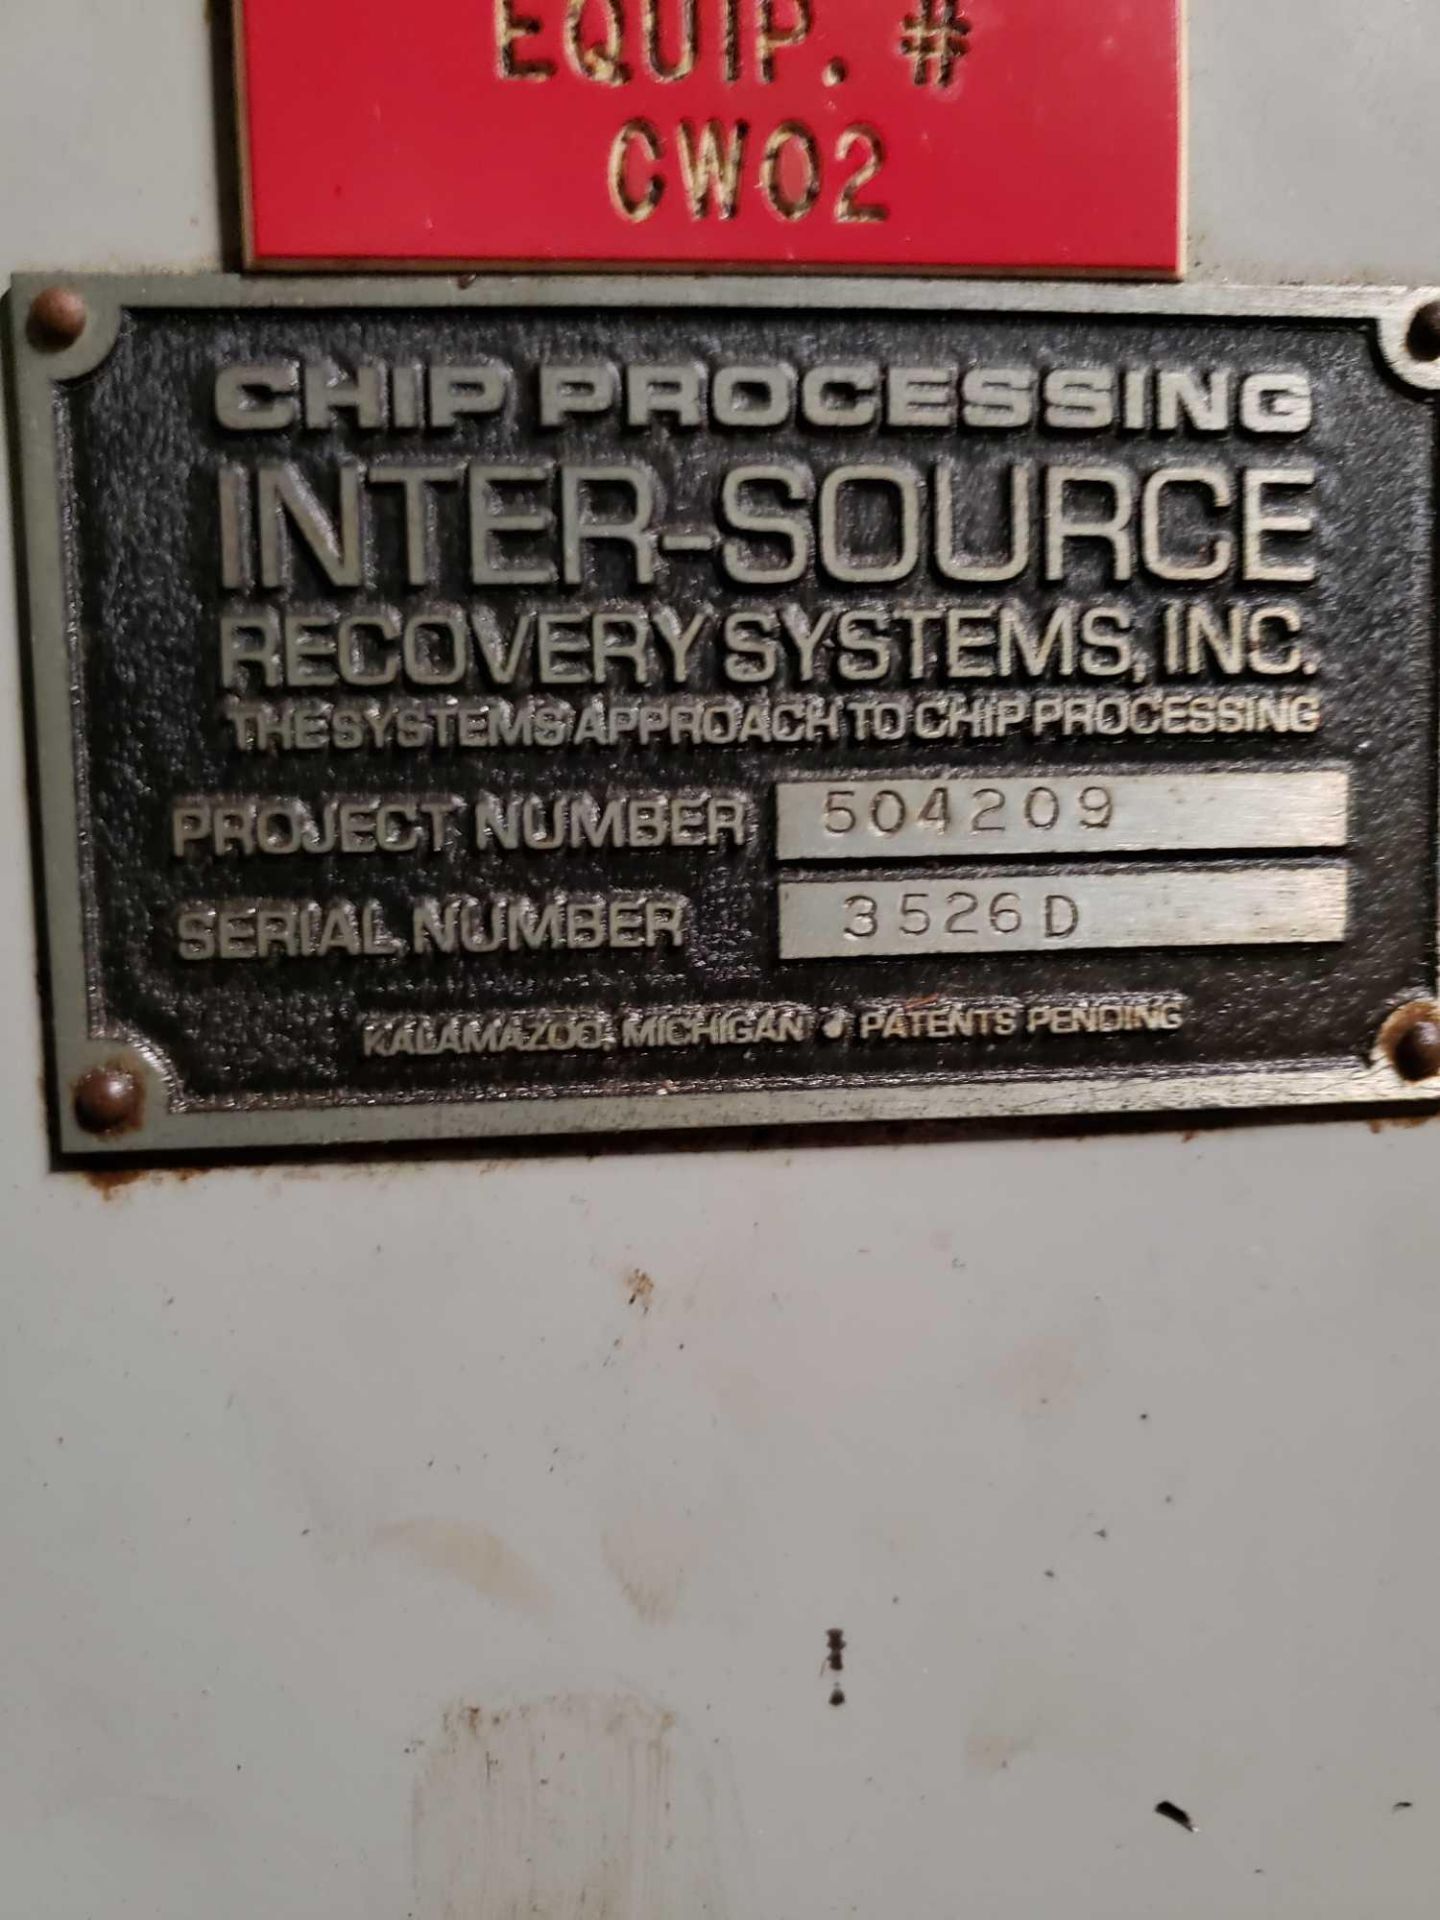 Intersource metal chip processing and recovery system - Image 3 of 7